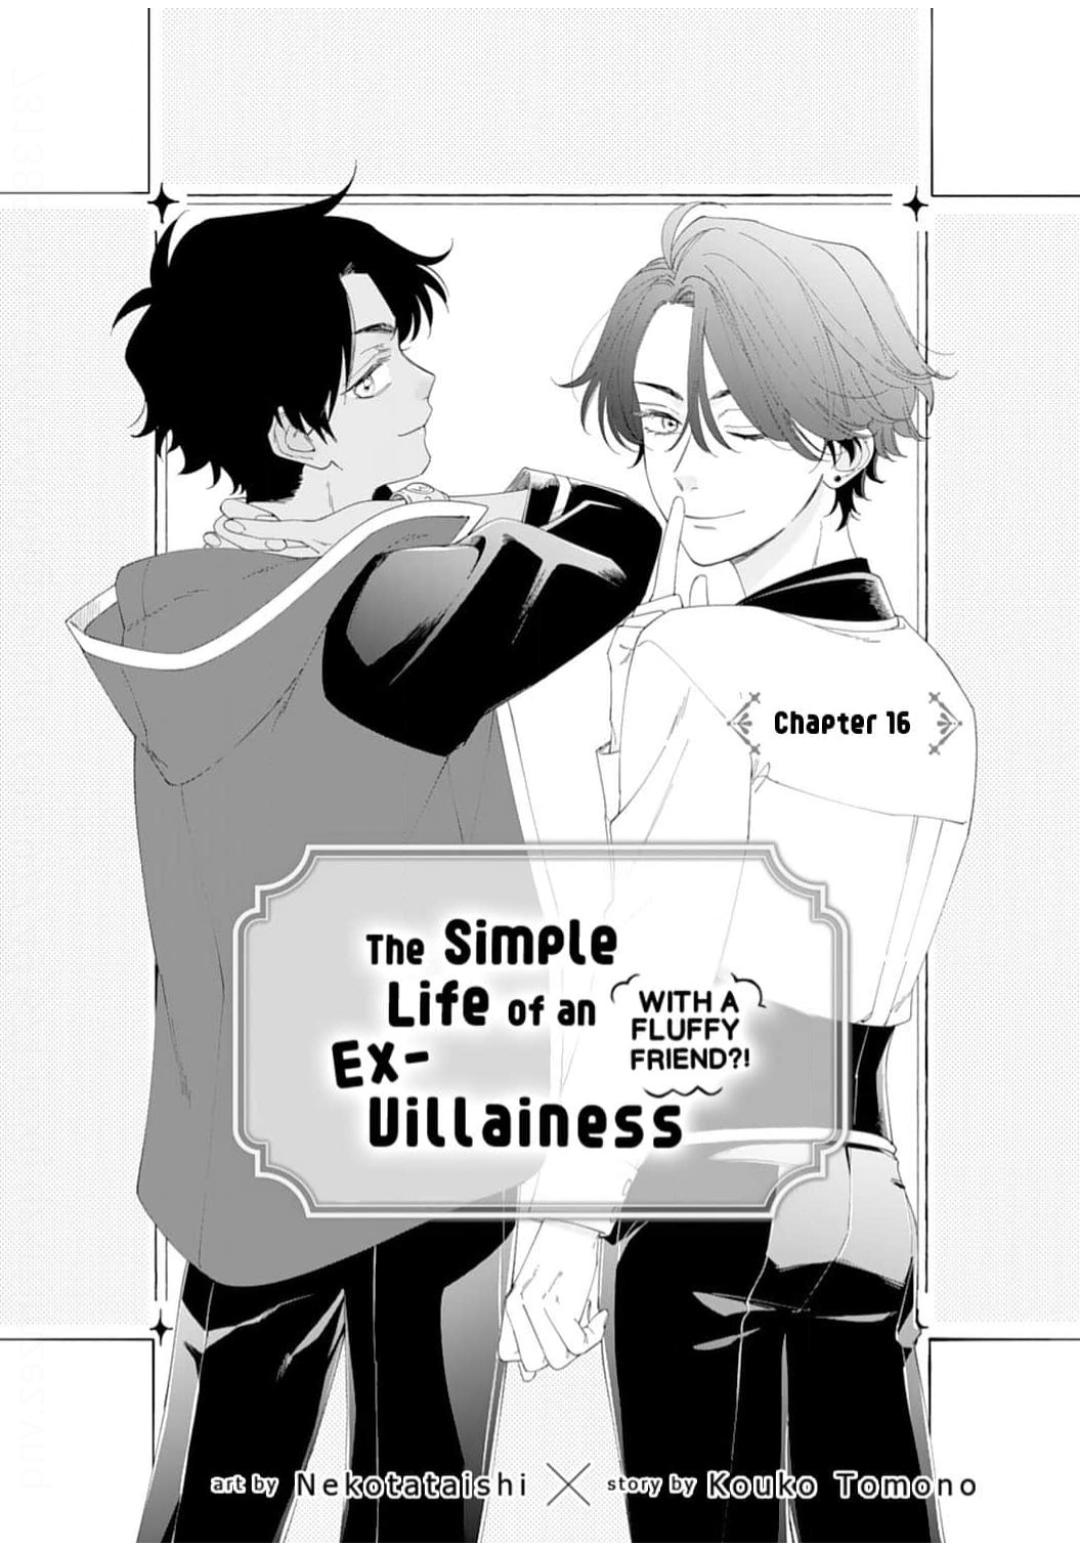 I’M A Banished Villainess, But I’M Accompanied By A Fluffy Creature?! My Peaceful Life Starts - chapter 16 - #2